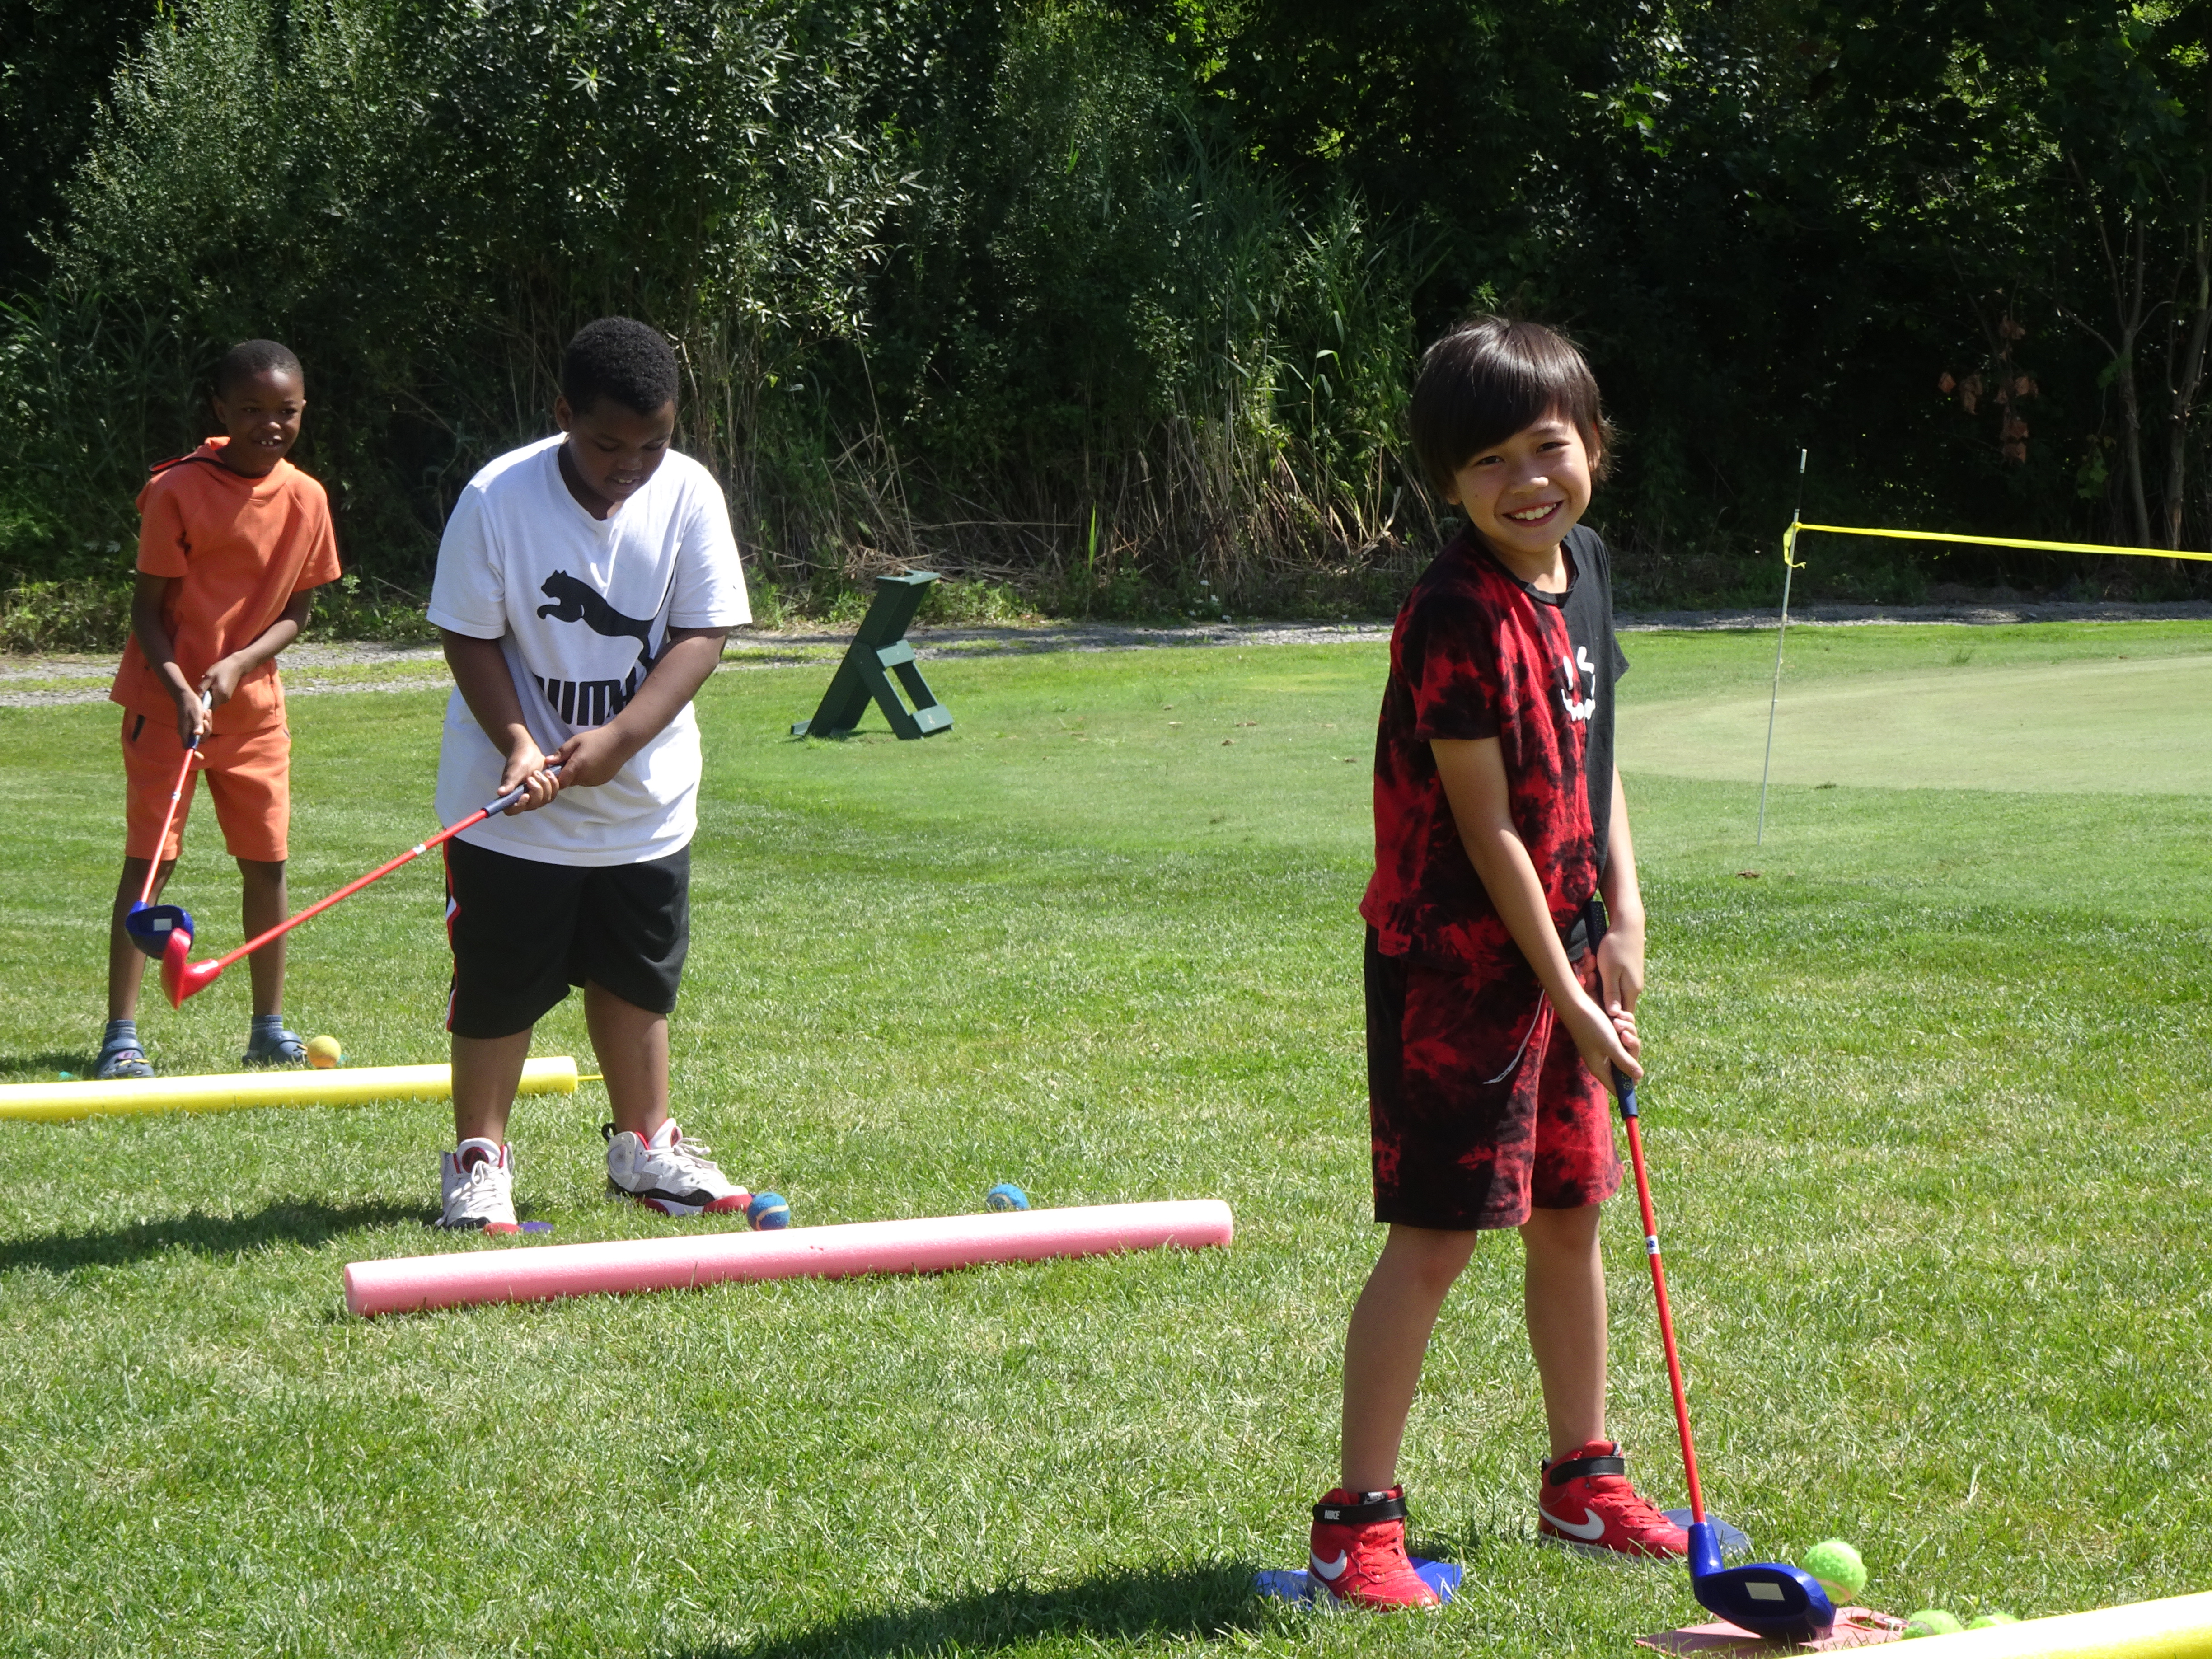 This is a photo of three students standing on a putting green swinging the golf club and smiling at the camera.